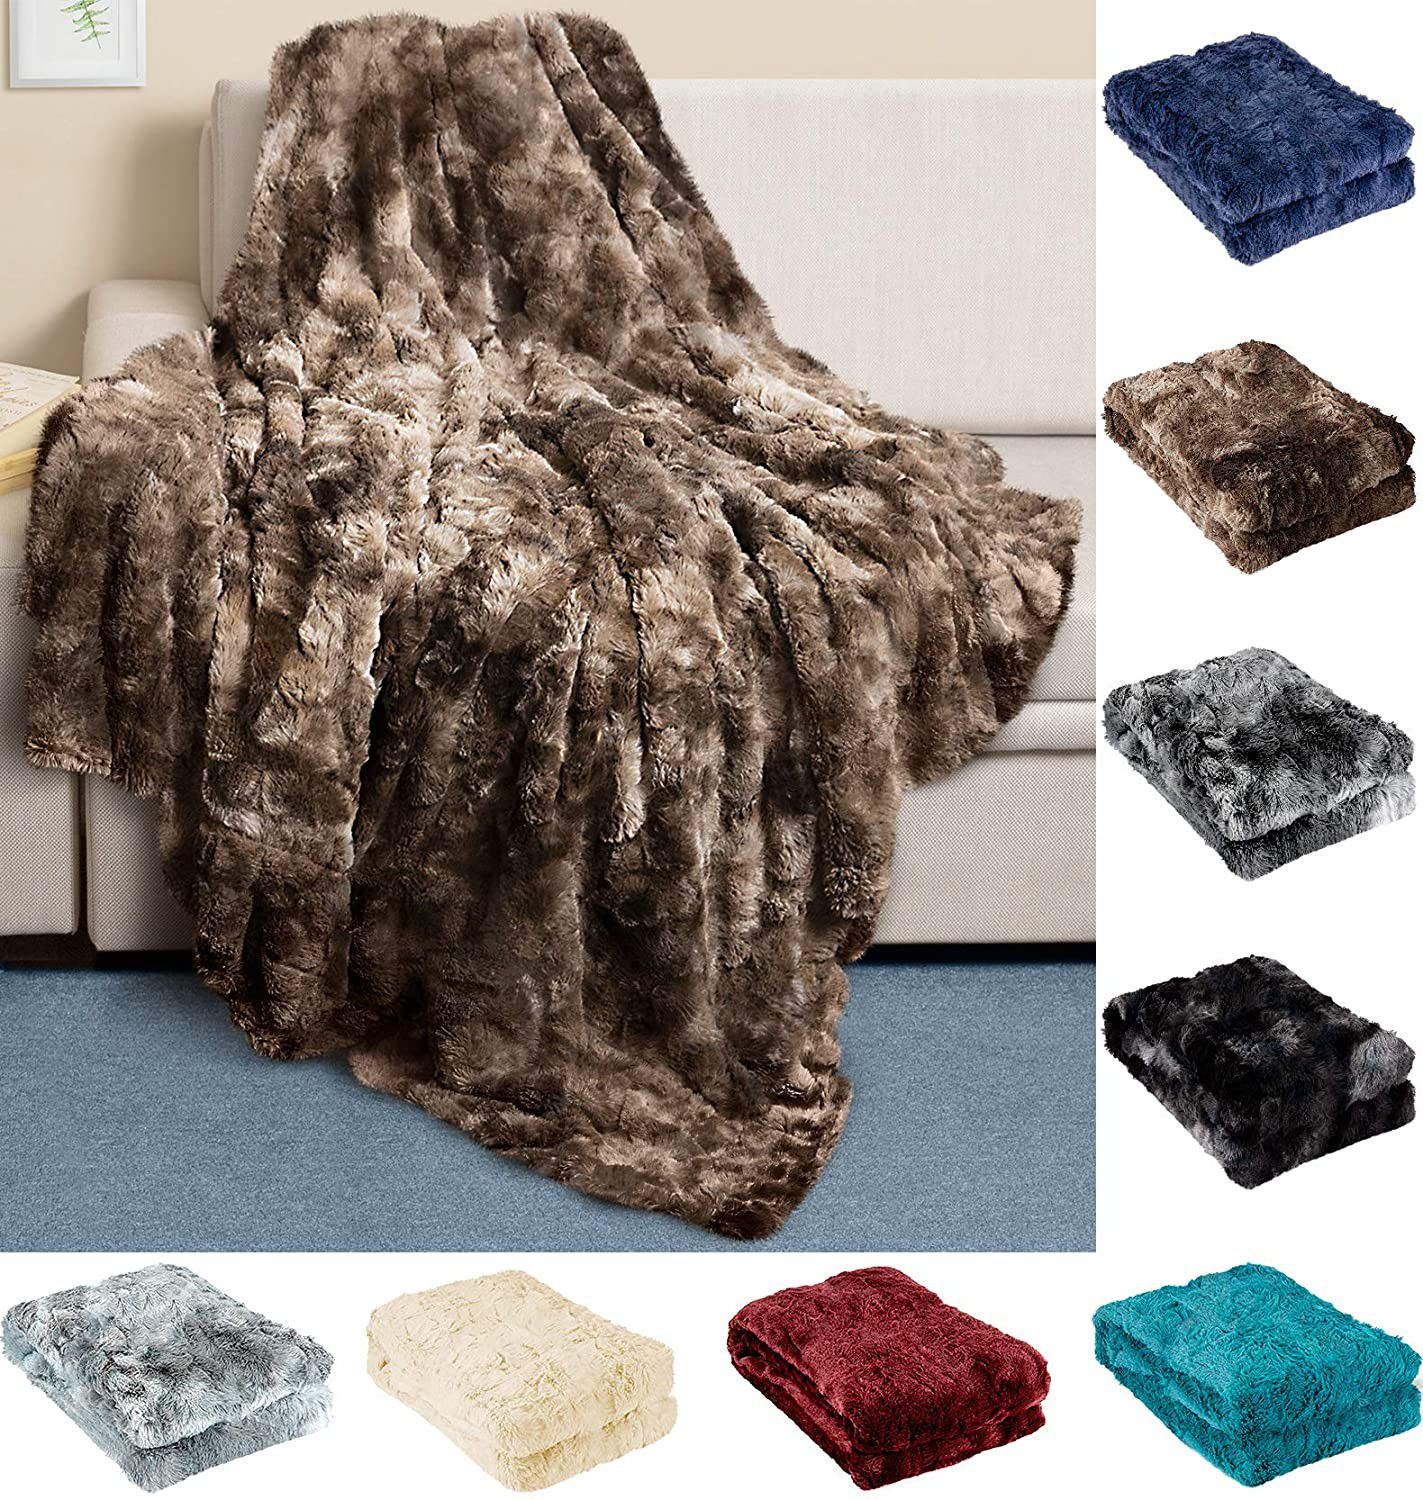 Luxury Faux Fur Throw Blanket - Ultra Soft and Fluffy - Plush for Couch Bed and Living Room - Fall Winter and Spring - 50x65 (Full Size) Brown